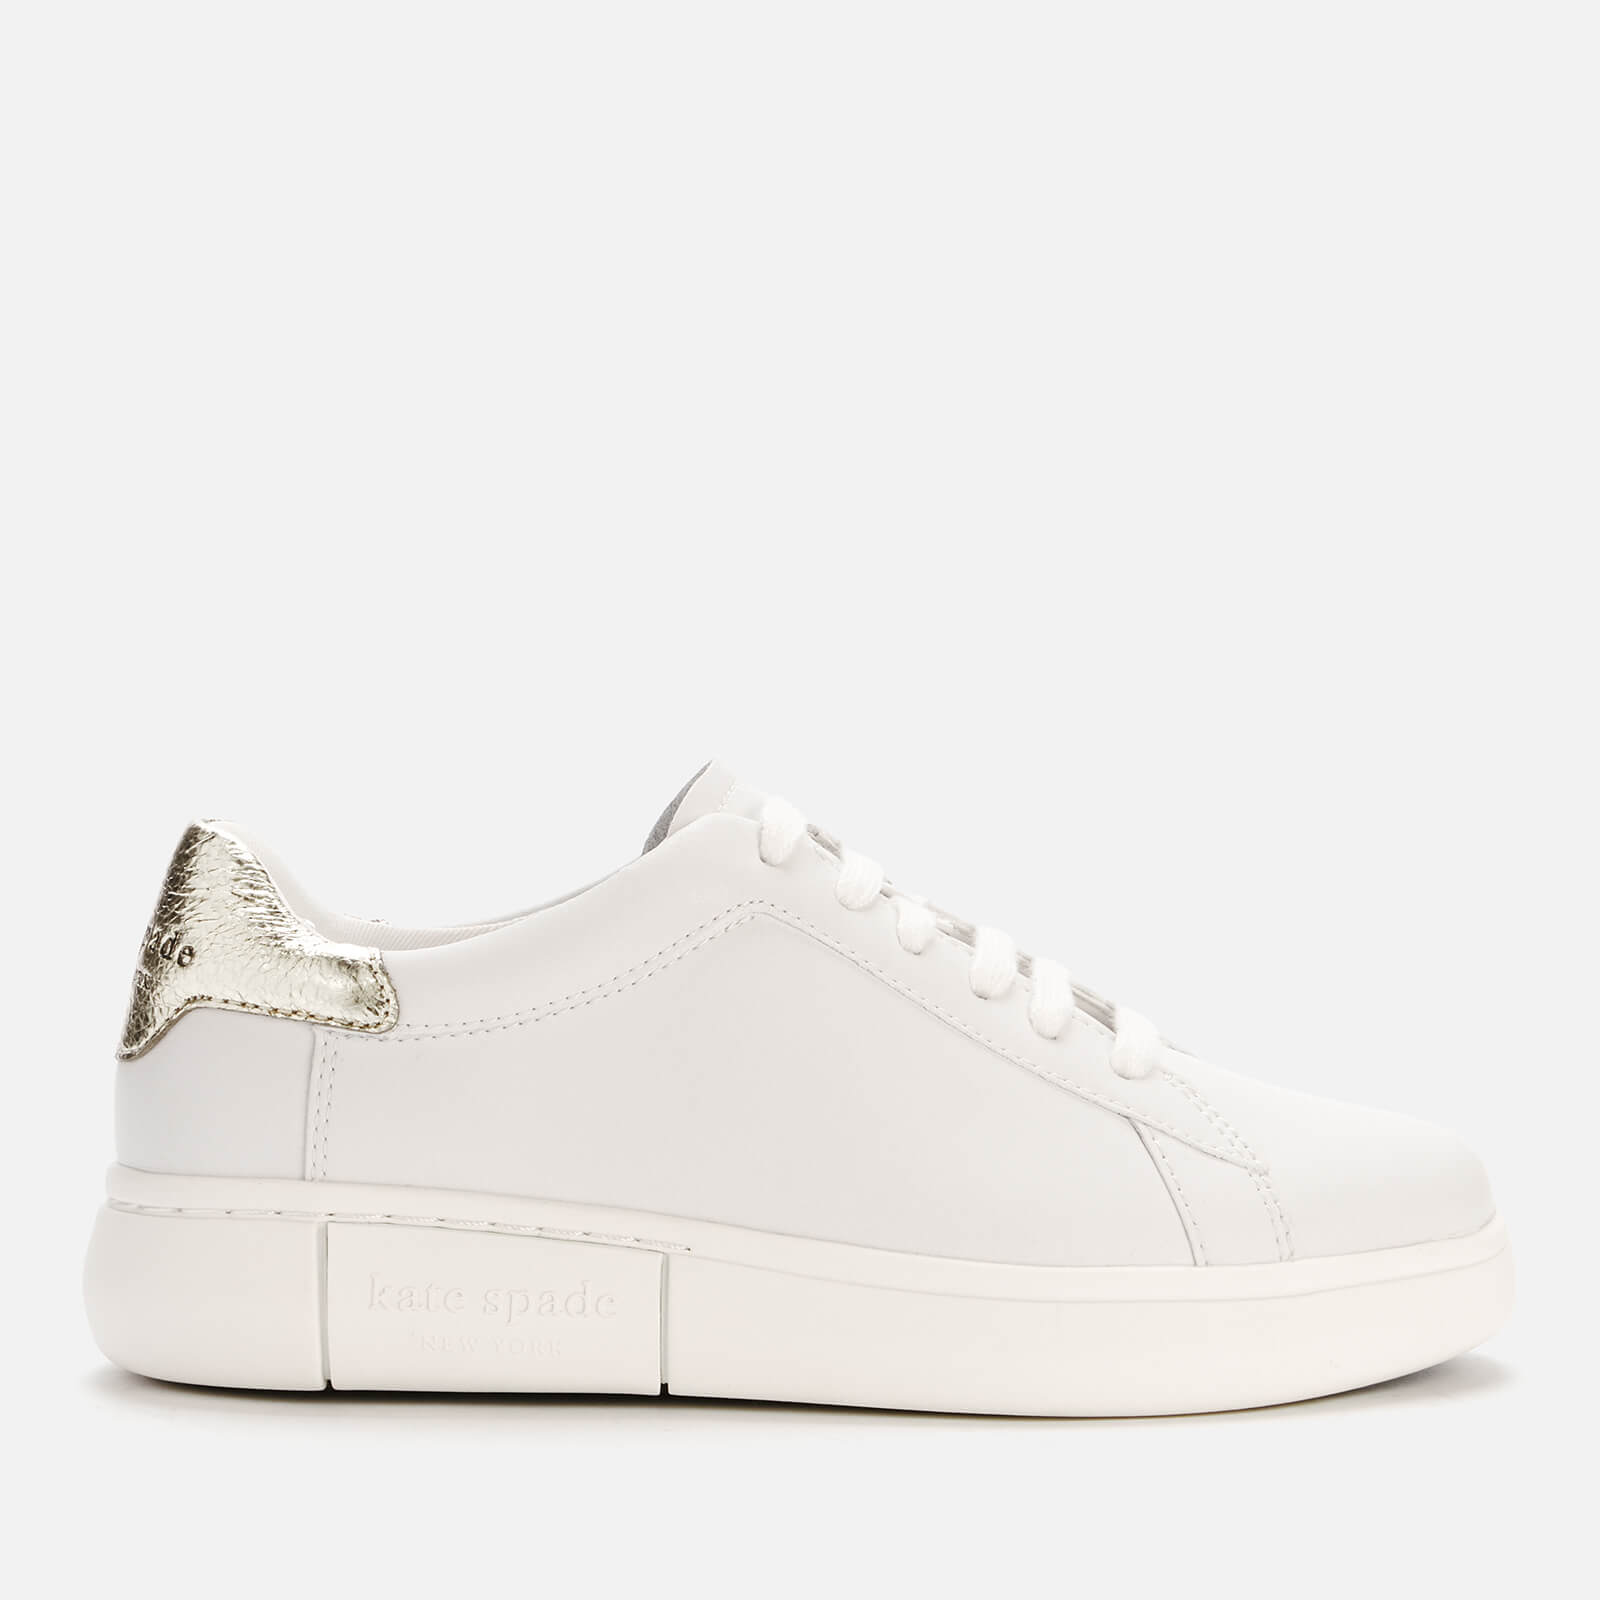 Kate Spade New York Women’s Lift Leather Cupsole Trainers - Optic White/Pale Gold